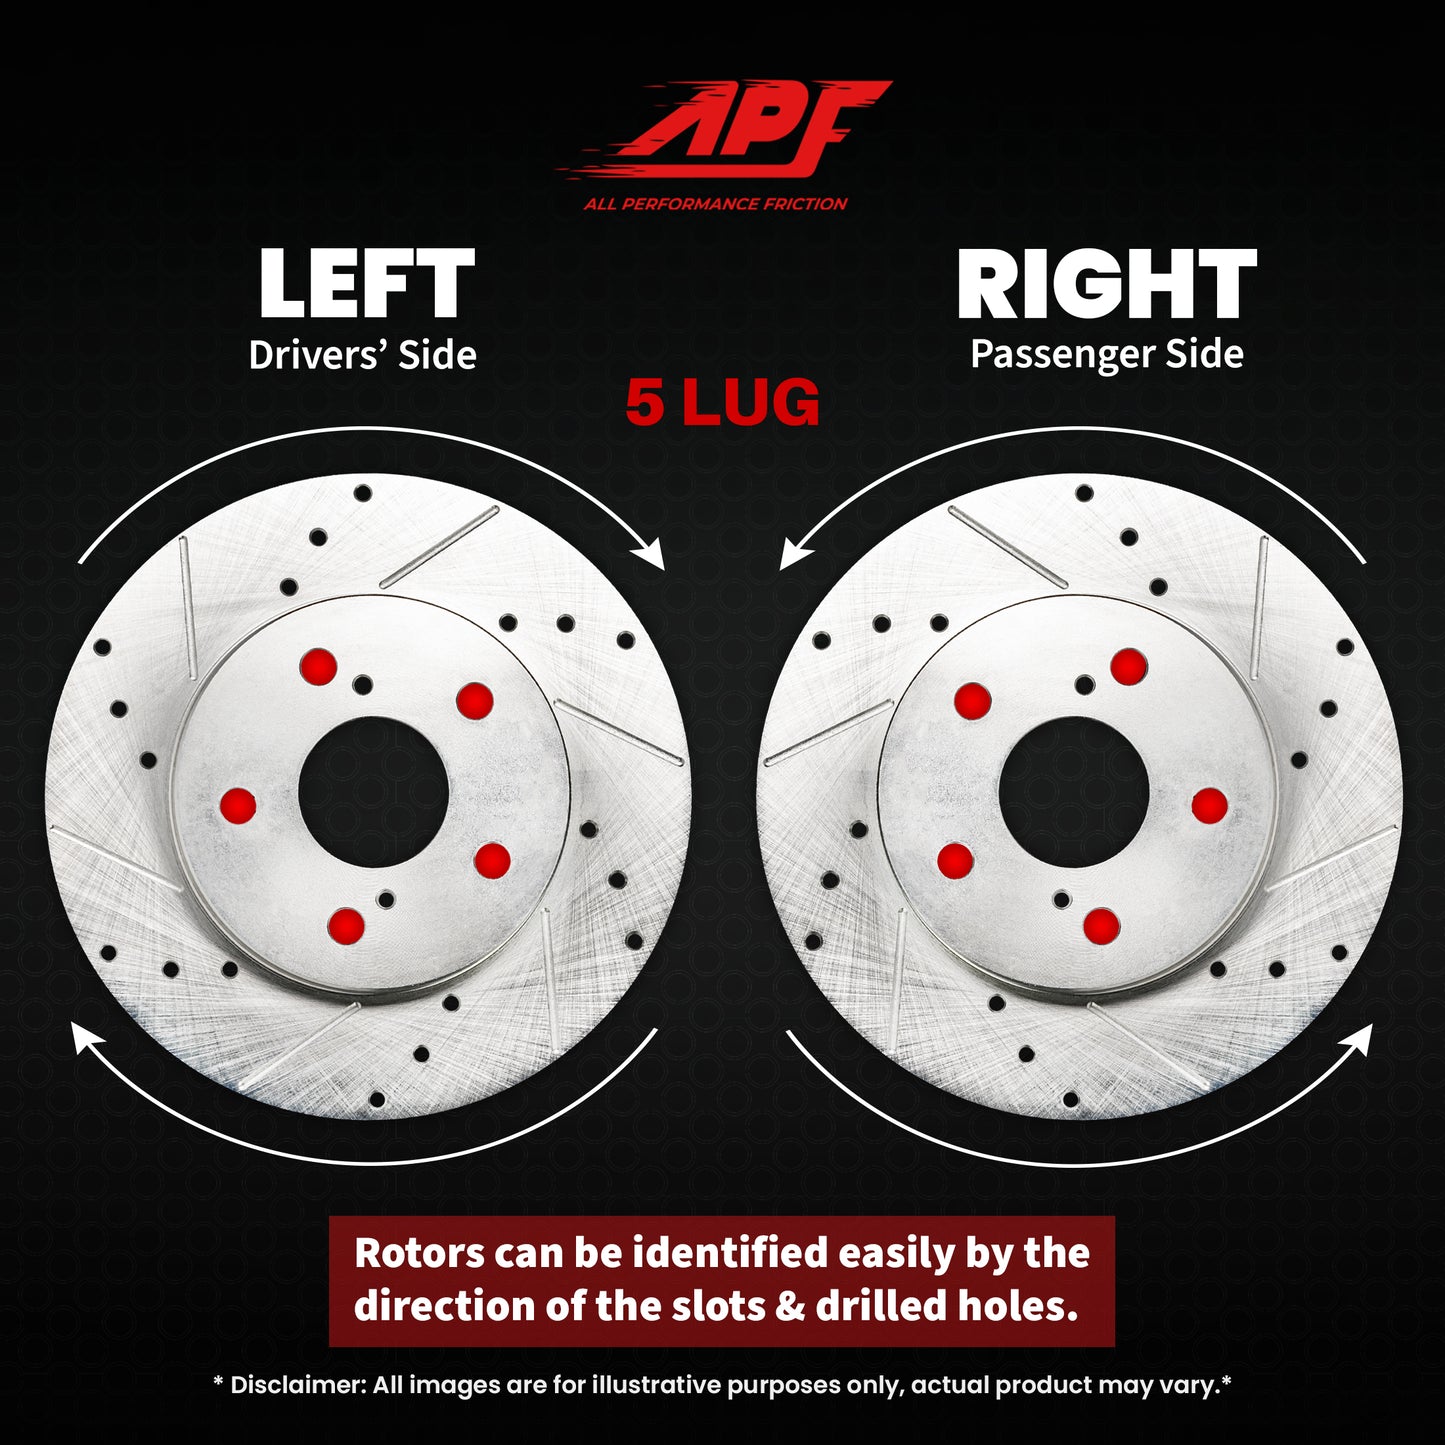 APF All Performance Friction Front Rotors compatible with Volkswagen Routan 2009-2014 Zinc Drilled Slotted Rotors | $141.69